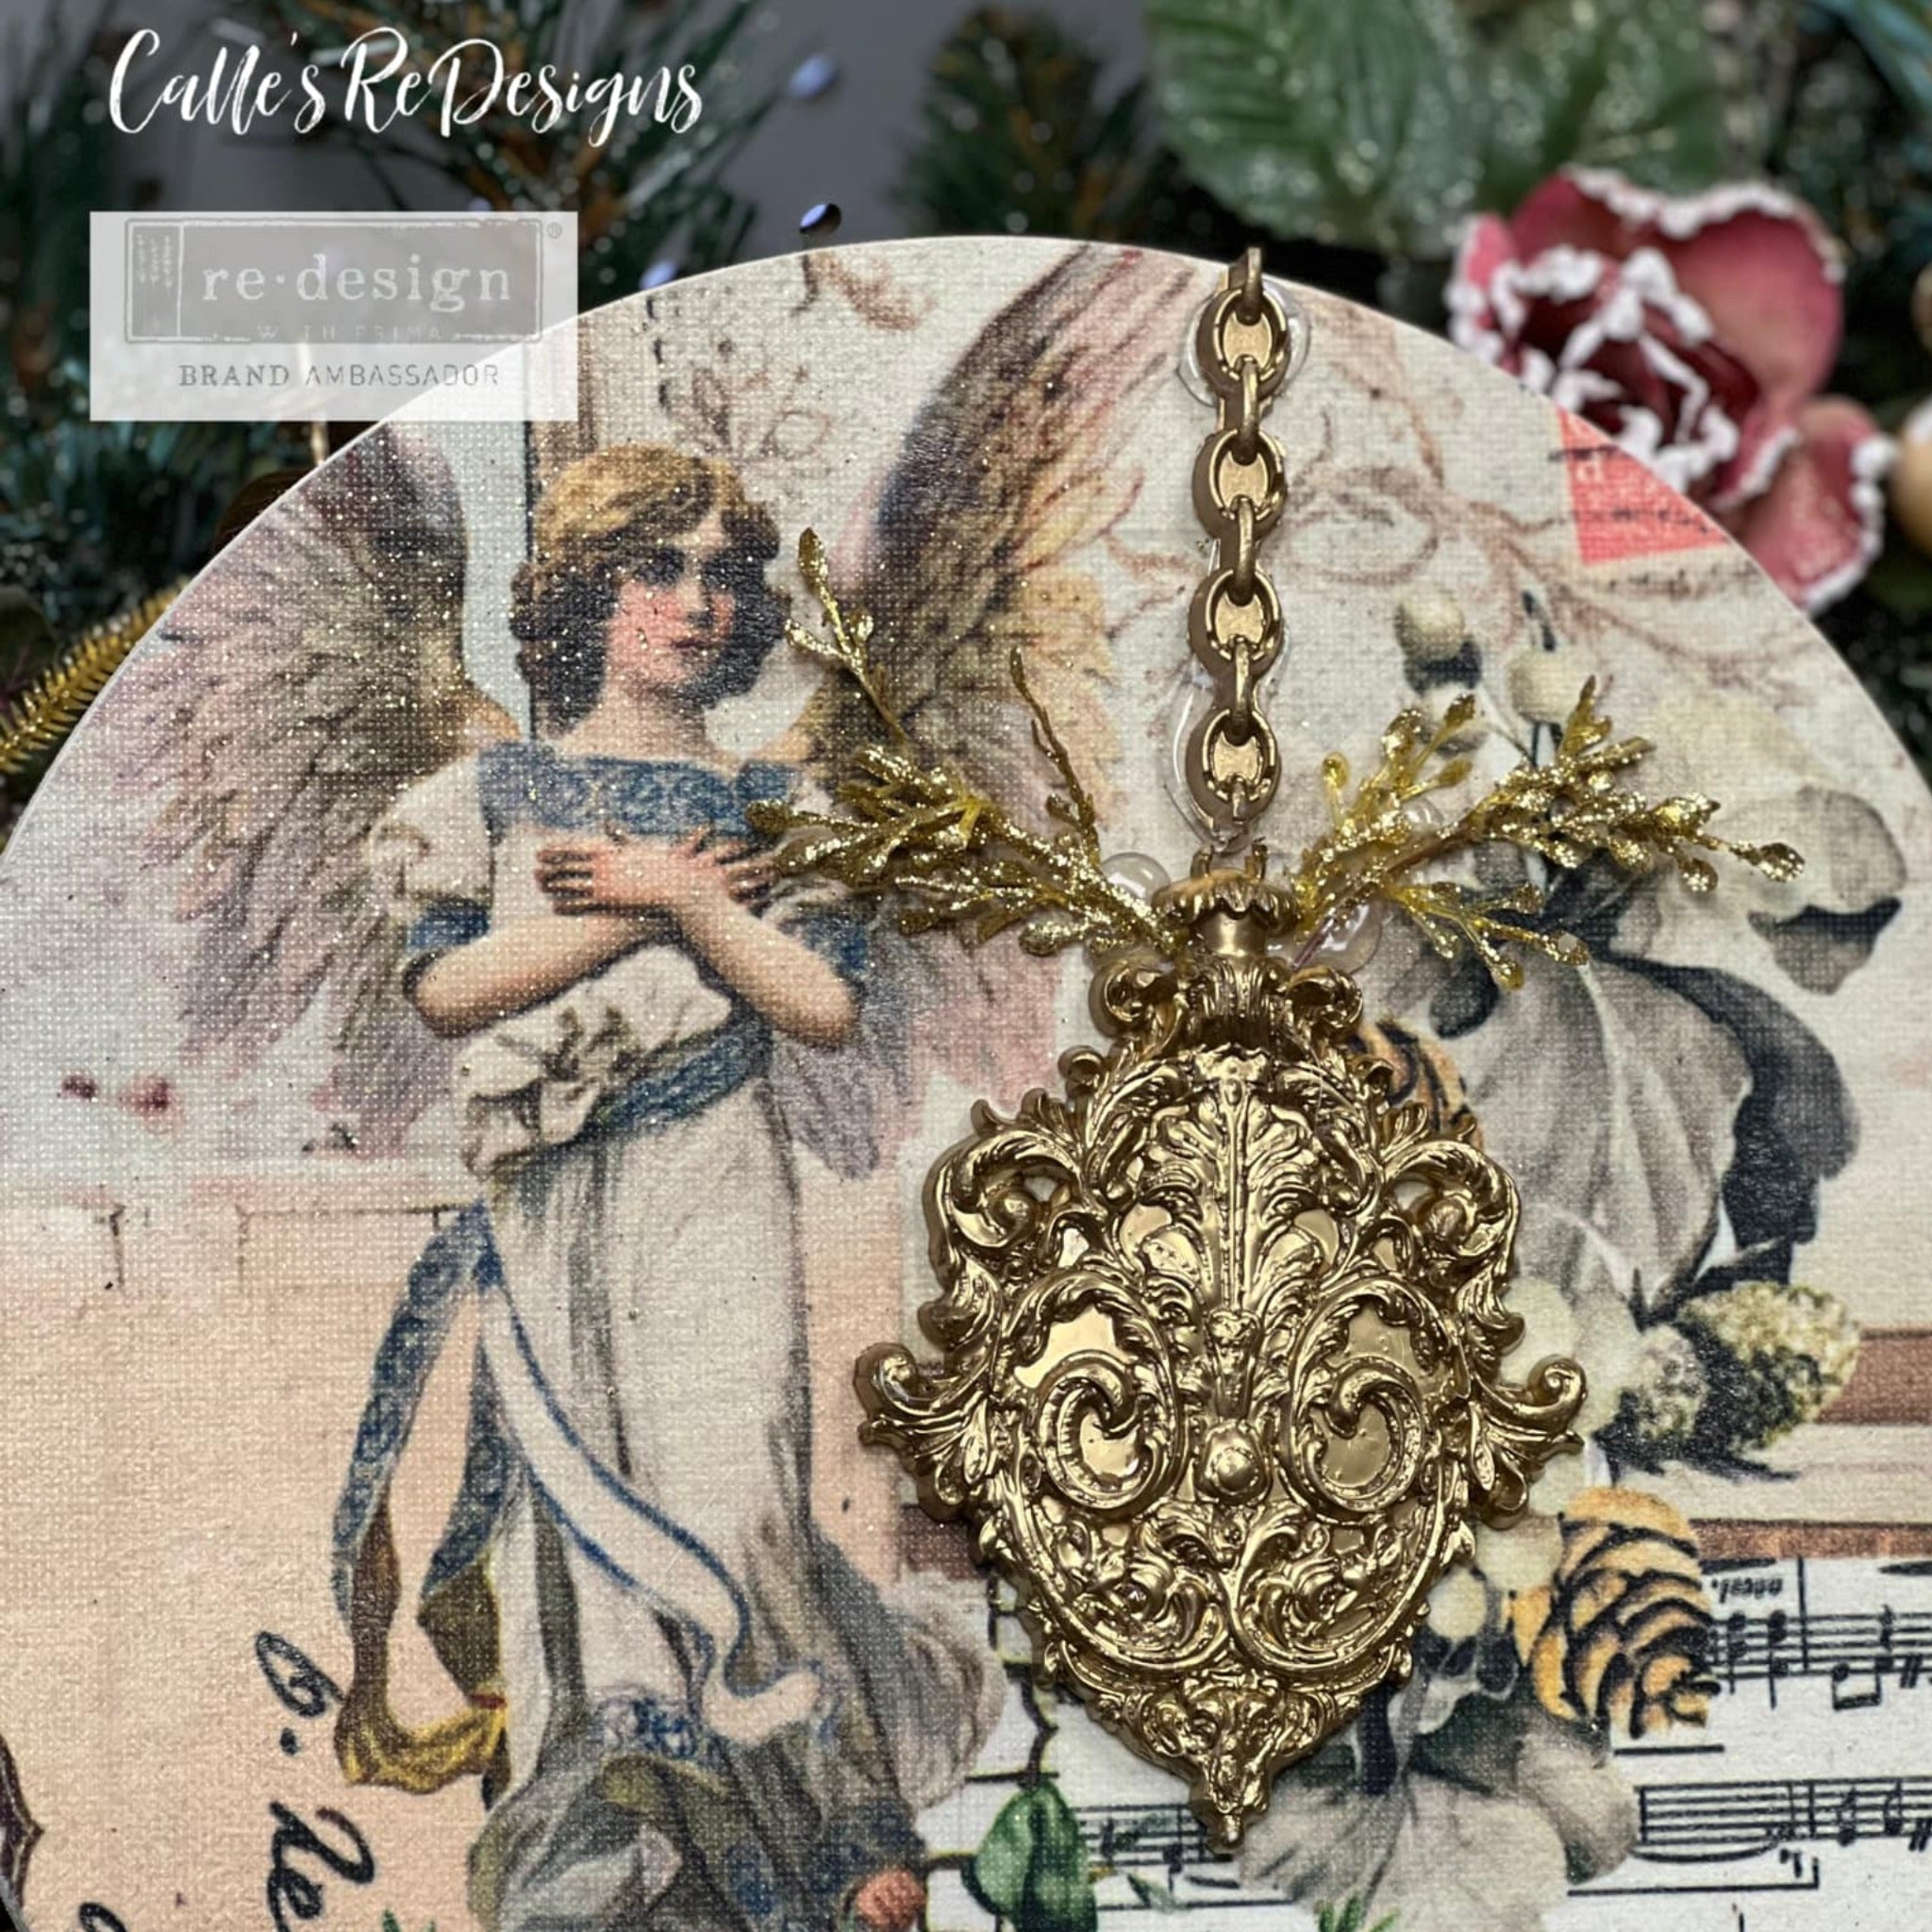 A circle canvas created by Calle's ReDesigns features an angel and vintage sheet music from ReDesign with Prima's Holly Jolly Hideaway 3 pack tissue papers. A gold painted silicone mould casting of an ornate ornament is also adorning the canvas.